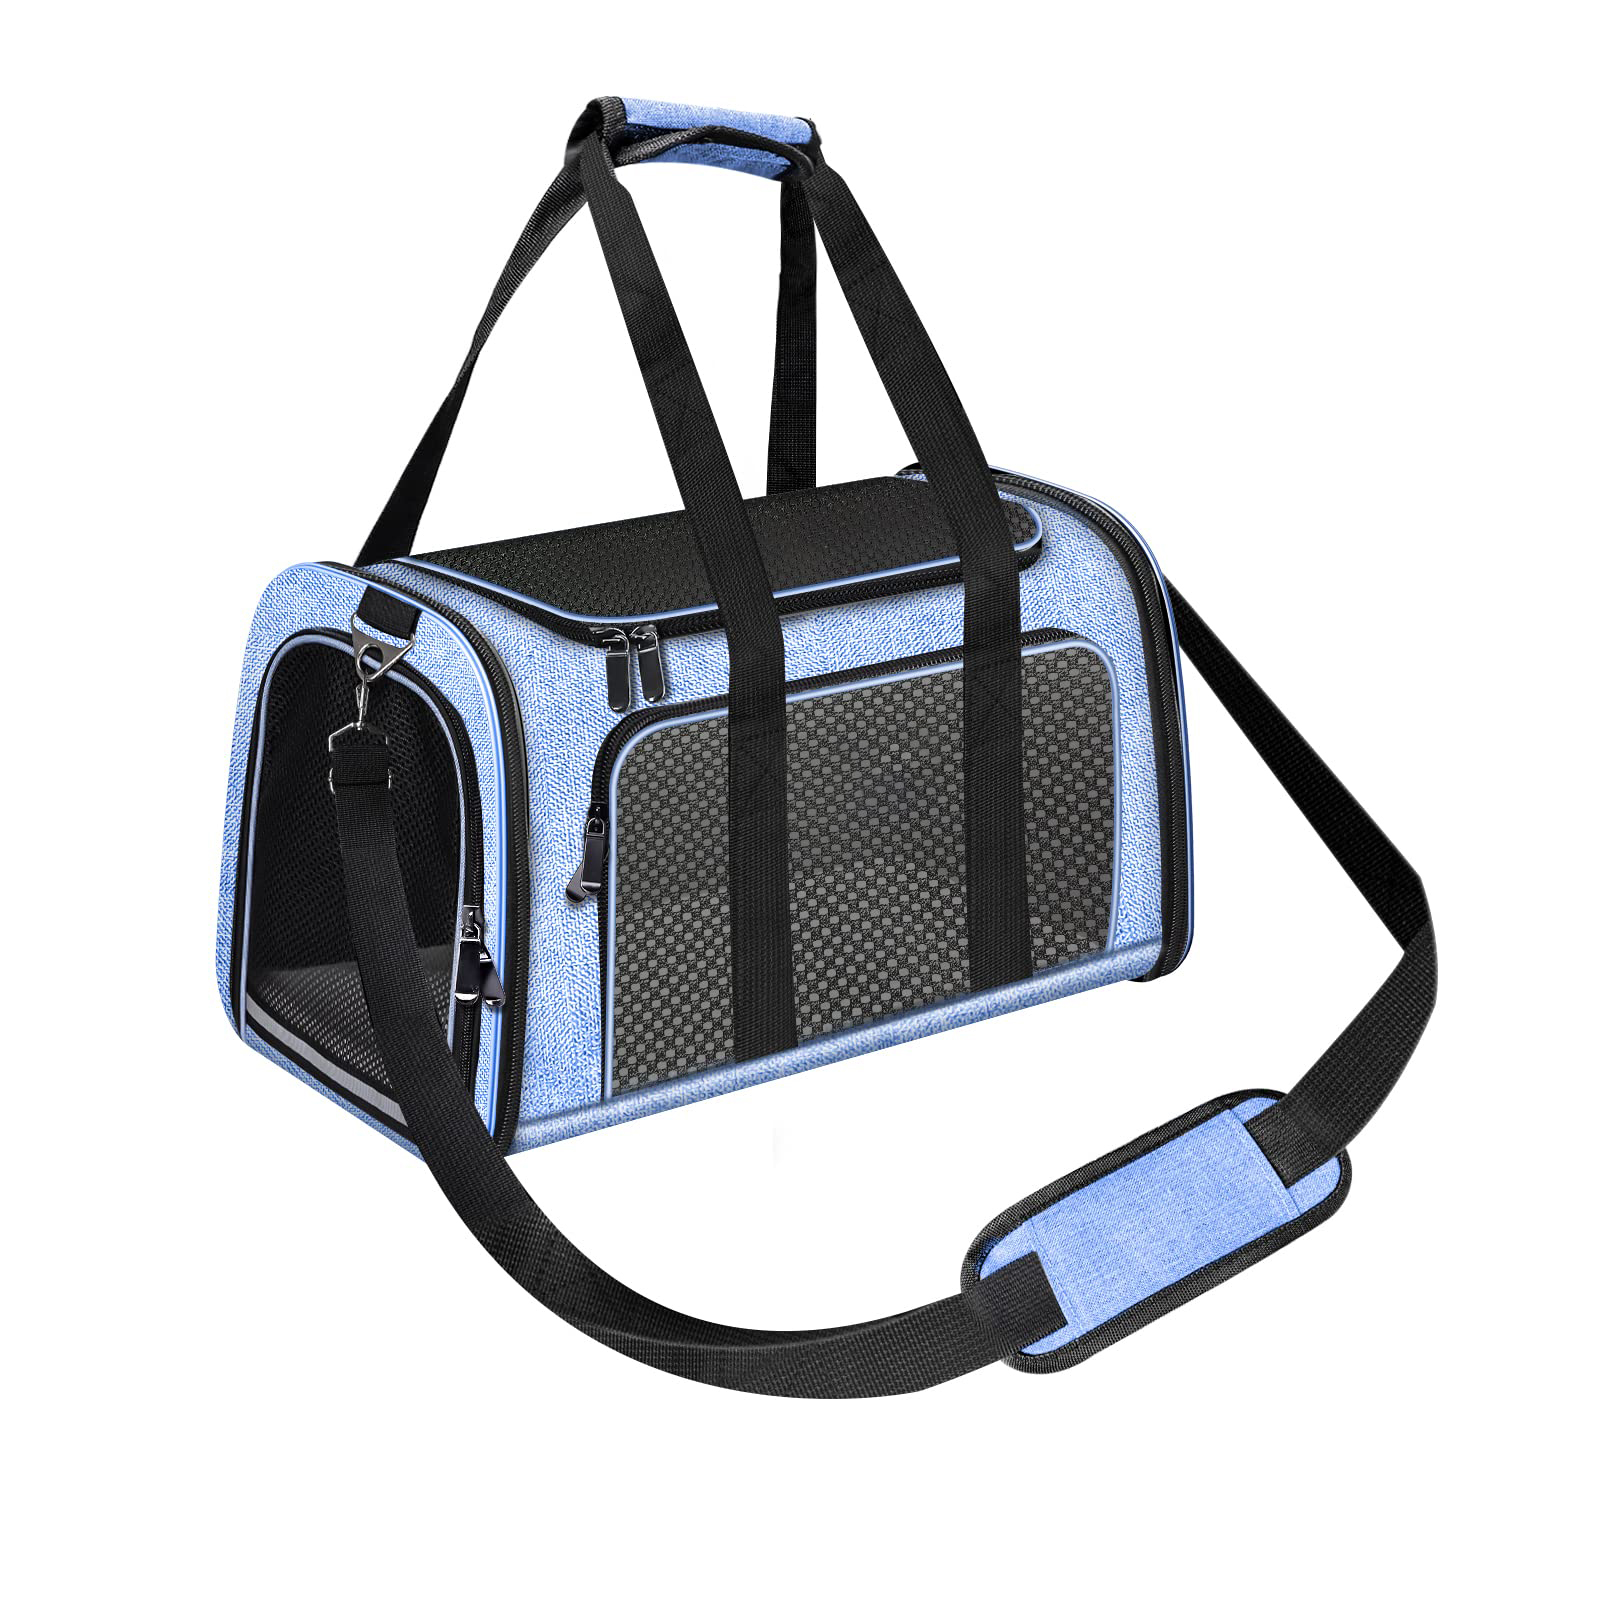 Airline box Pet carrier box collapsible soft-sided travel pet backpack